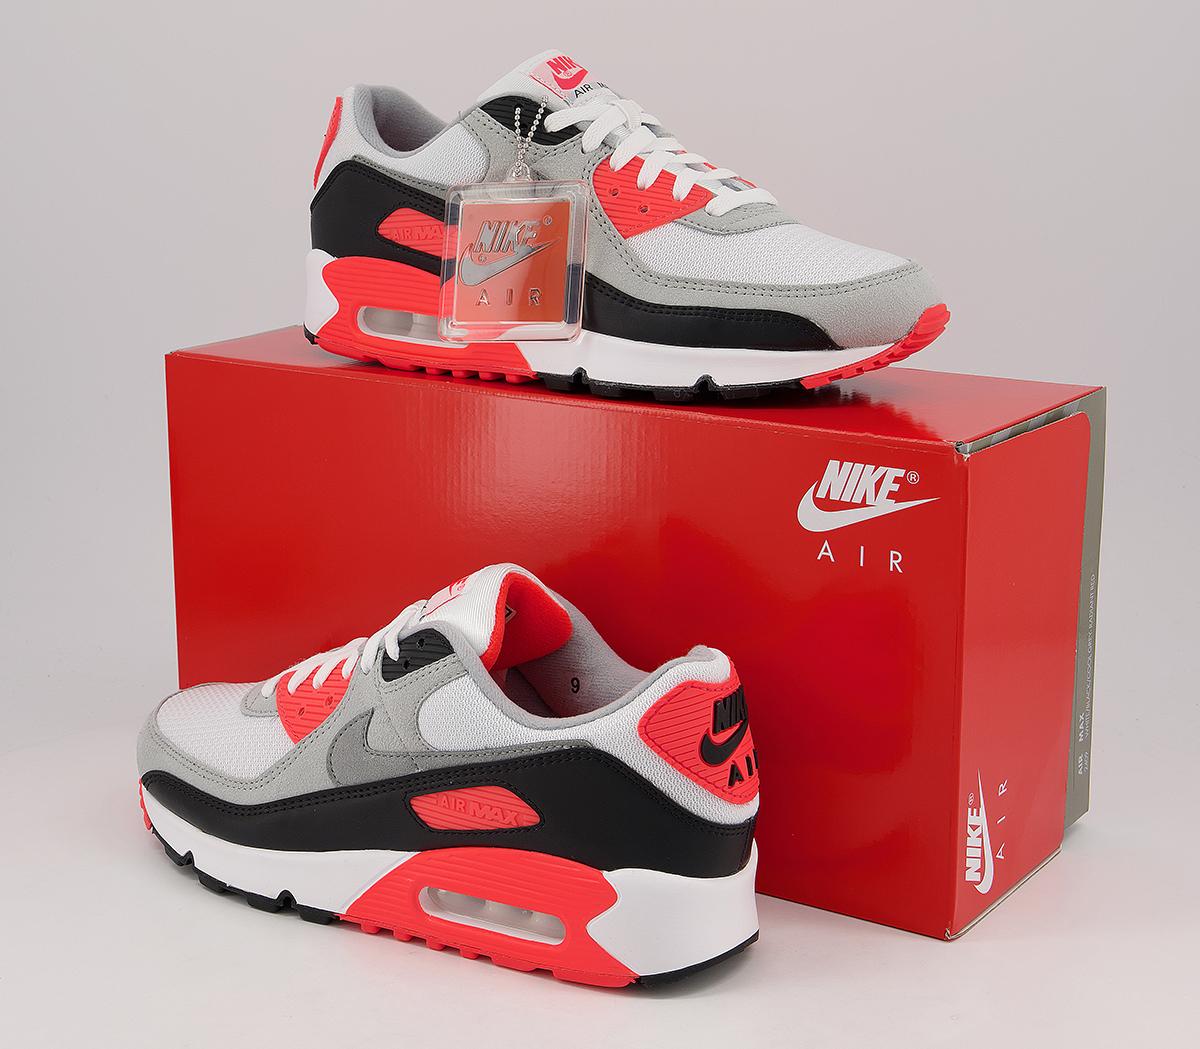 Nike Air Max Iii White Black Cool Grey Radiant Red - Unisex Sports